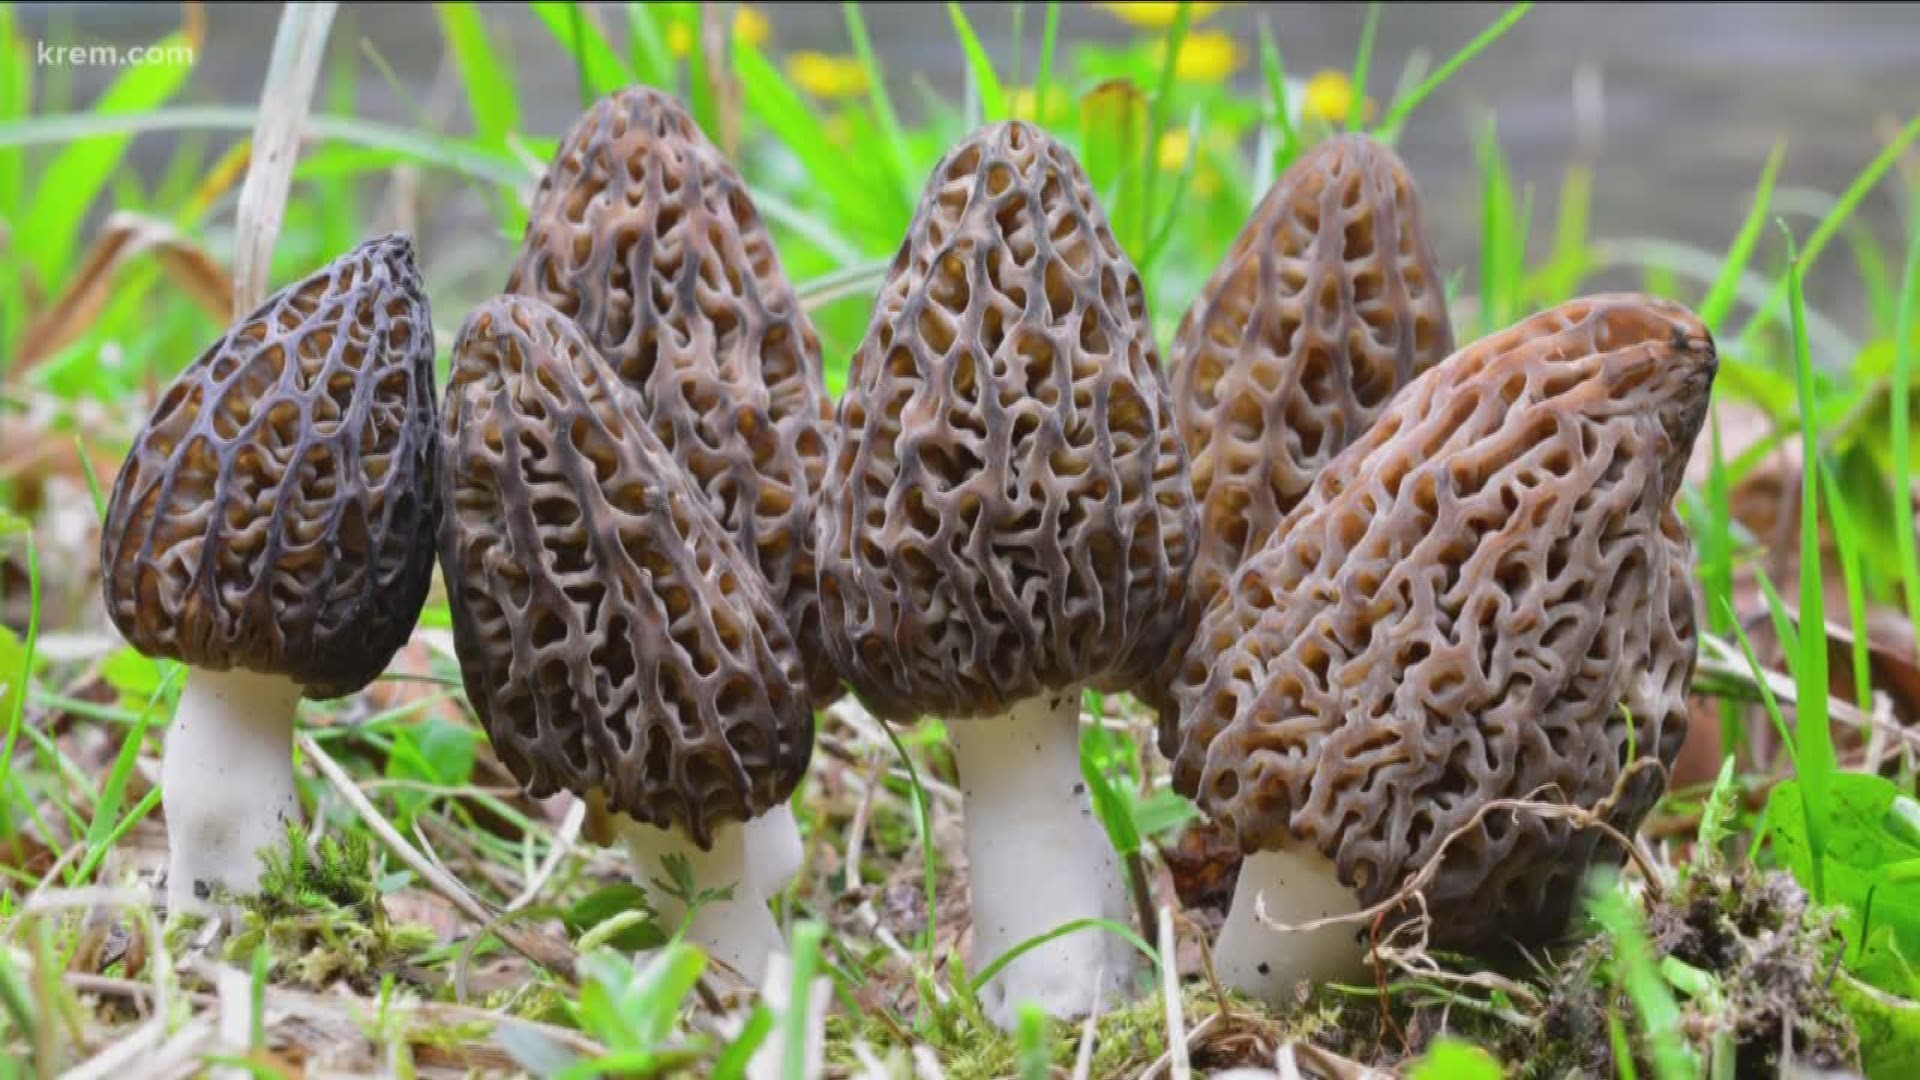 If you're not familiar, they're a type of wild mushroom that's prized for their taste. The other thing that makes them special is you can only find them two weeks out of the year.